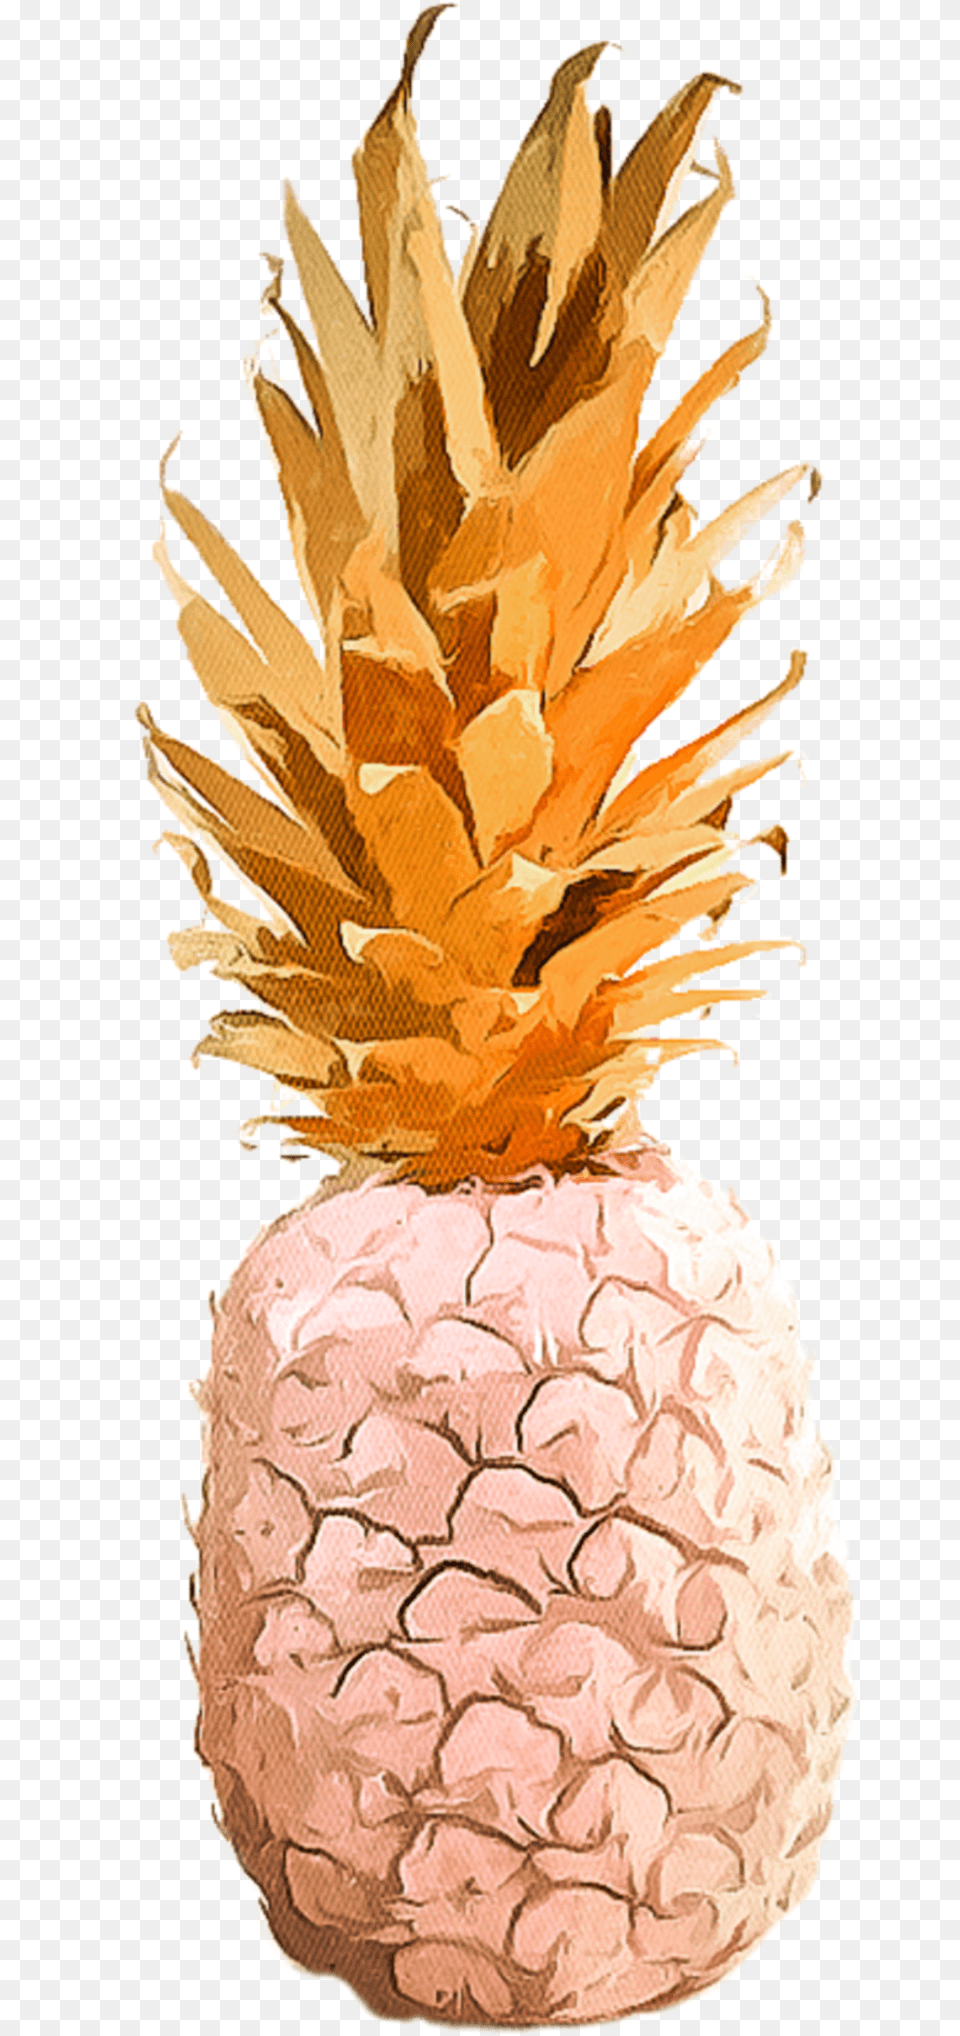 Aesthetic Tumblr Pineapple Pineapple, Food, Fruit, Plant, Produce Free Transparent Png